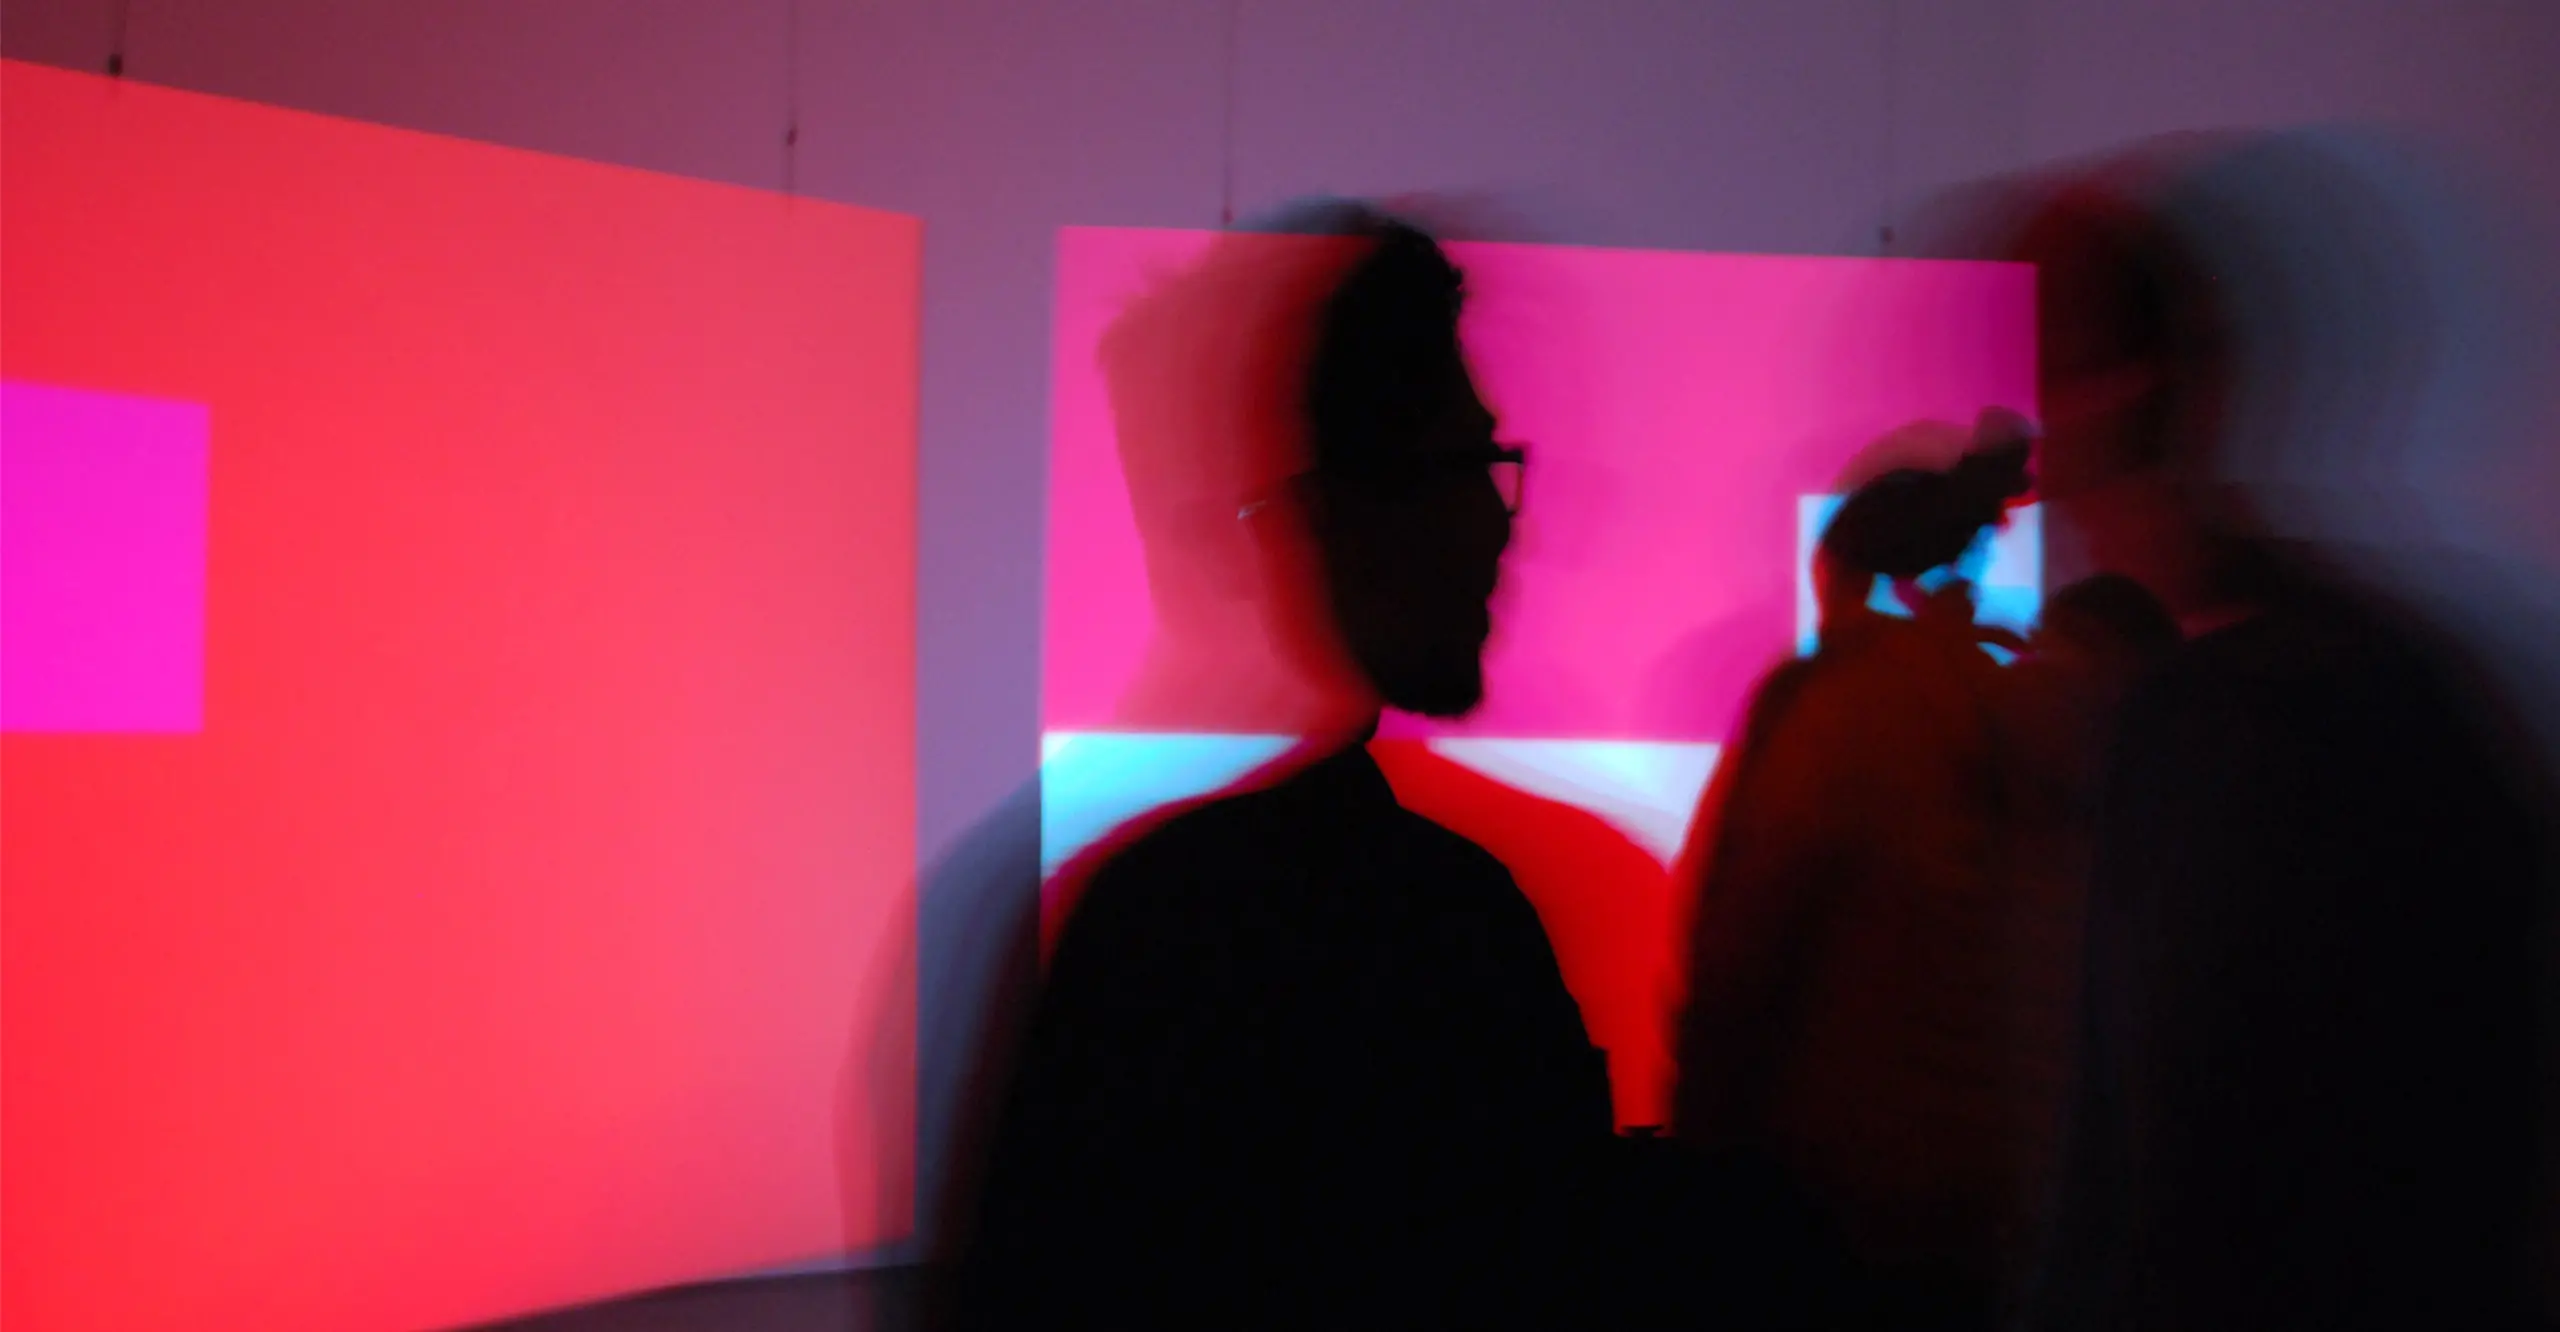 Documenting Digital Art - two figures silhouetted against a pink background